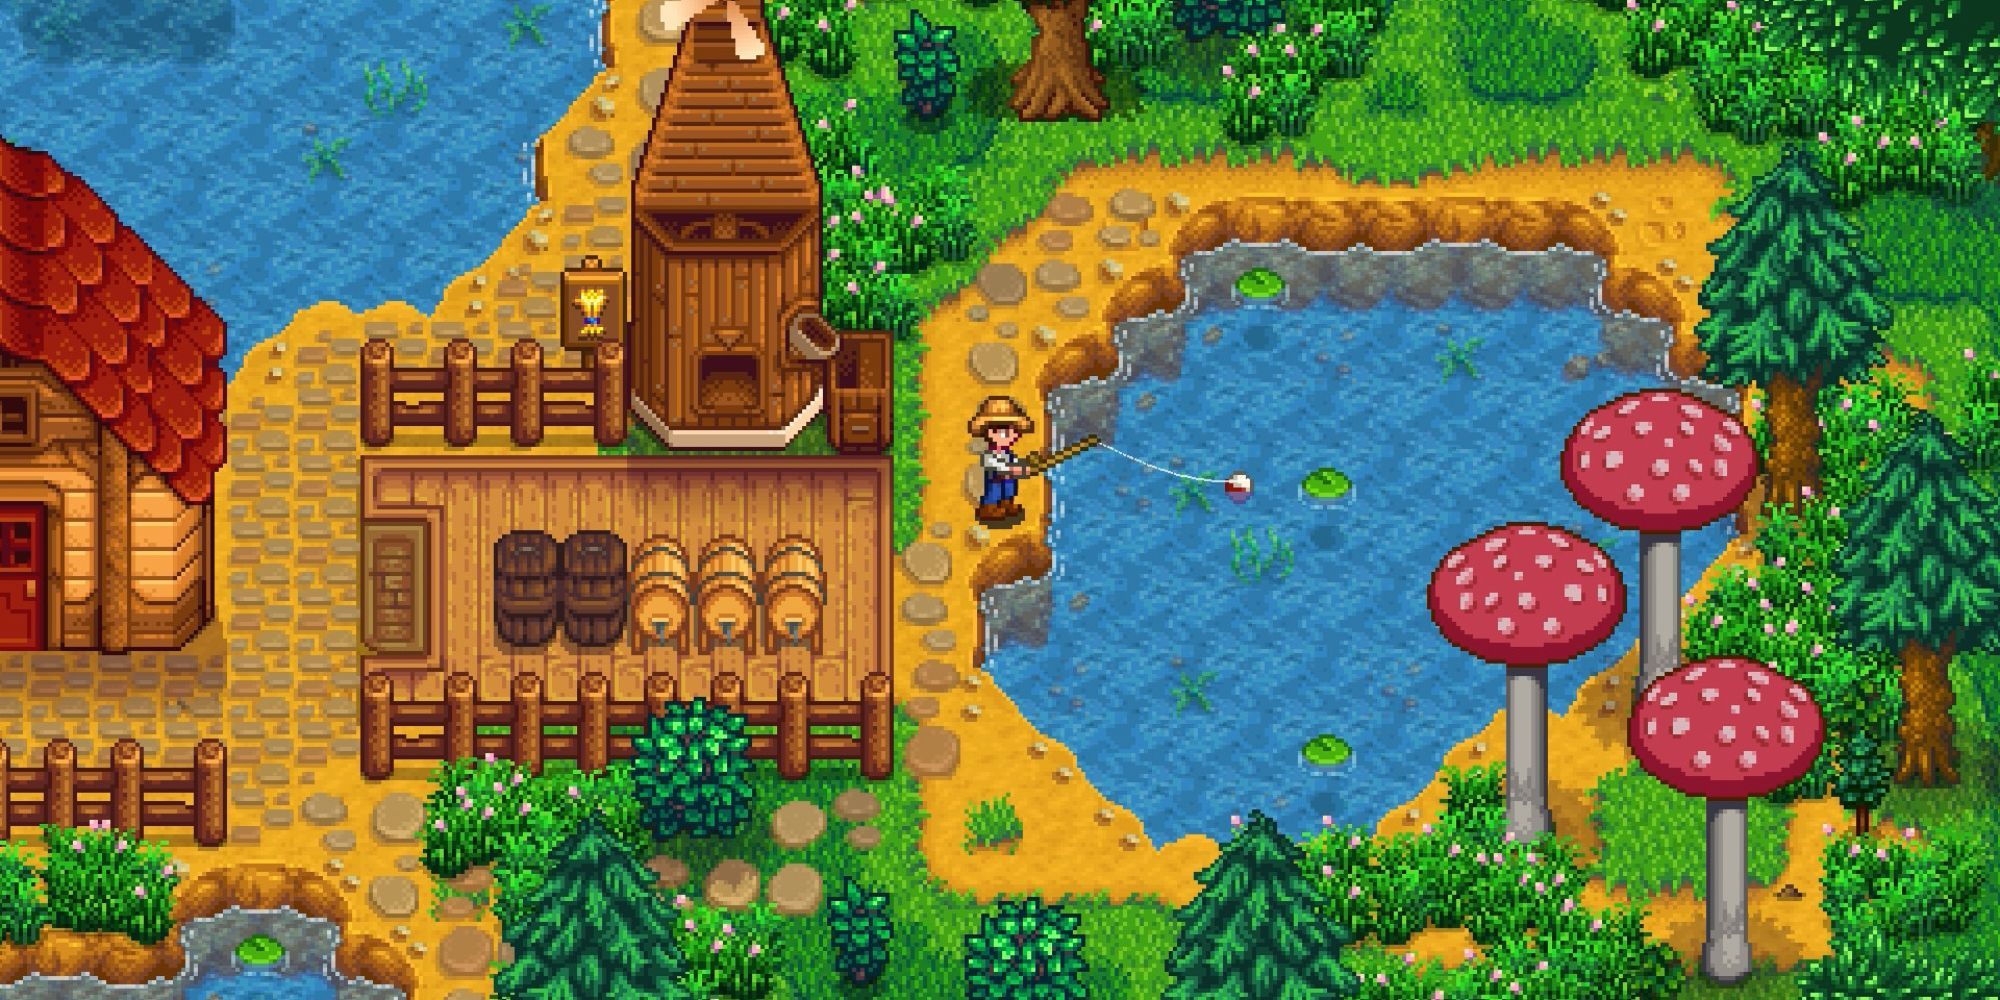 The protagonist fishes in the pond by his house